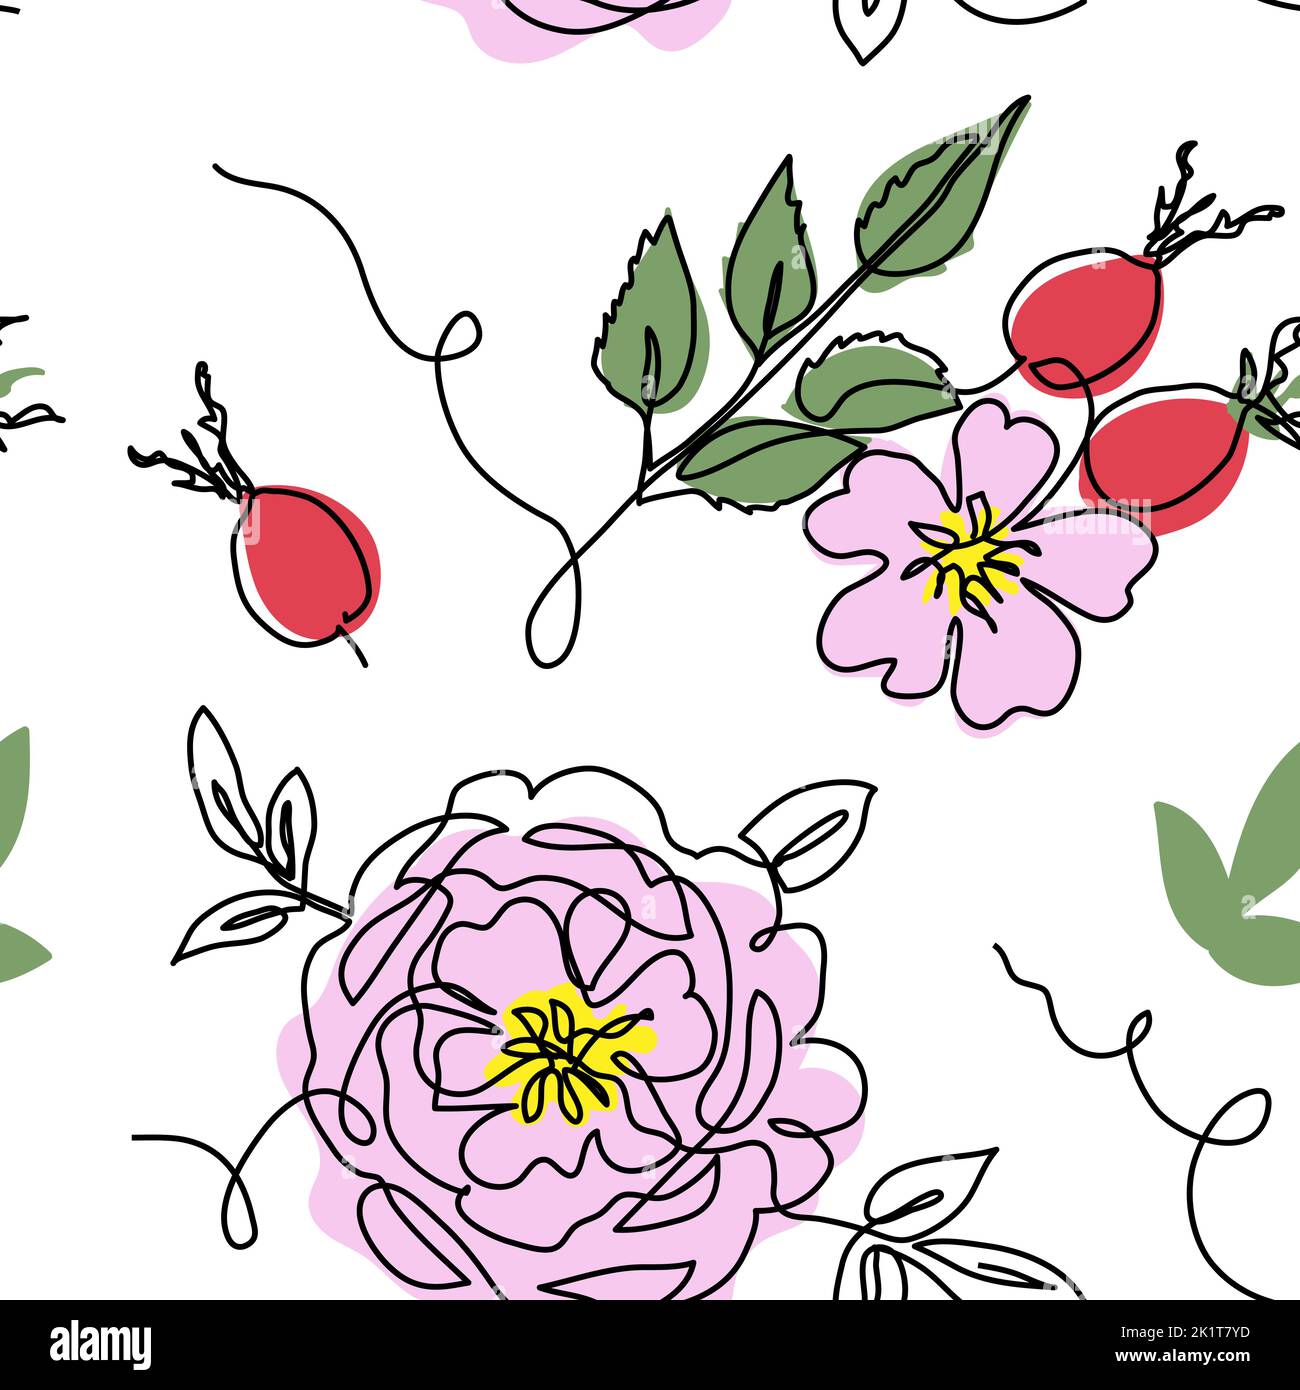 Rosehip, dog rose, briar, rosa canina, wild rose vector seamless pattern. One continuous line art drawing of flowers and berries, rosehip pattern Stock Vector